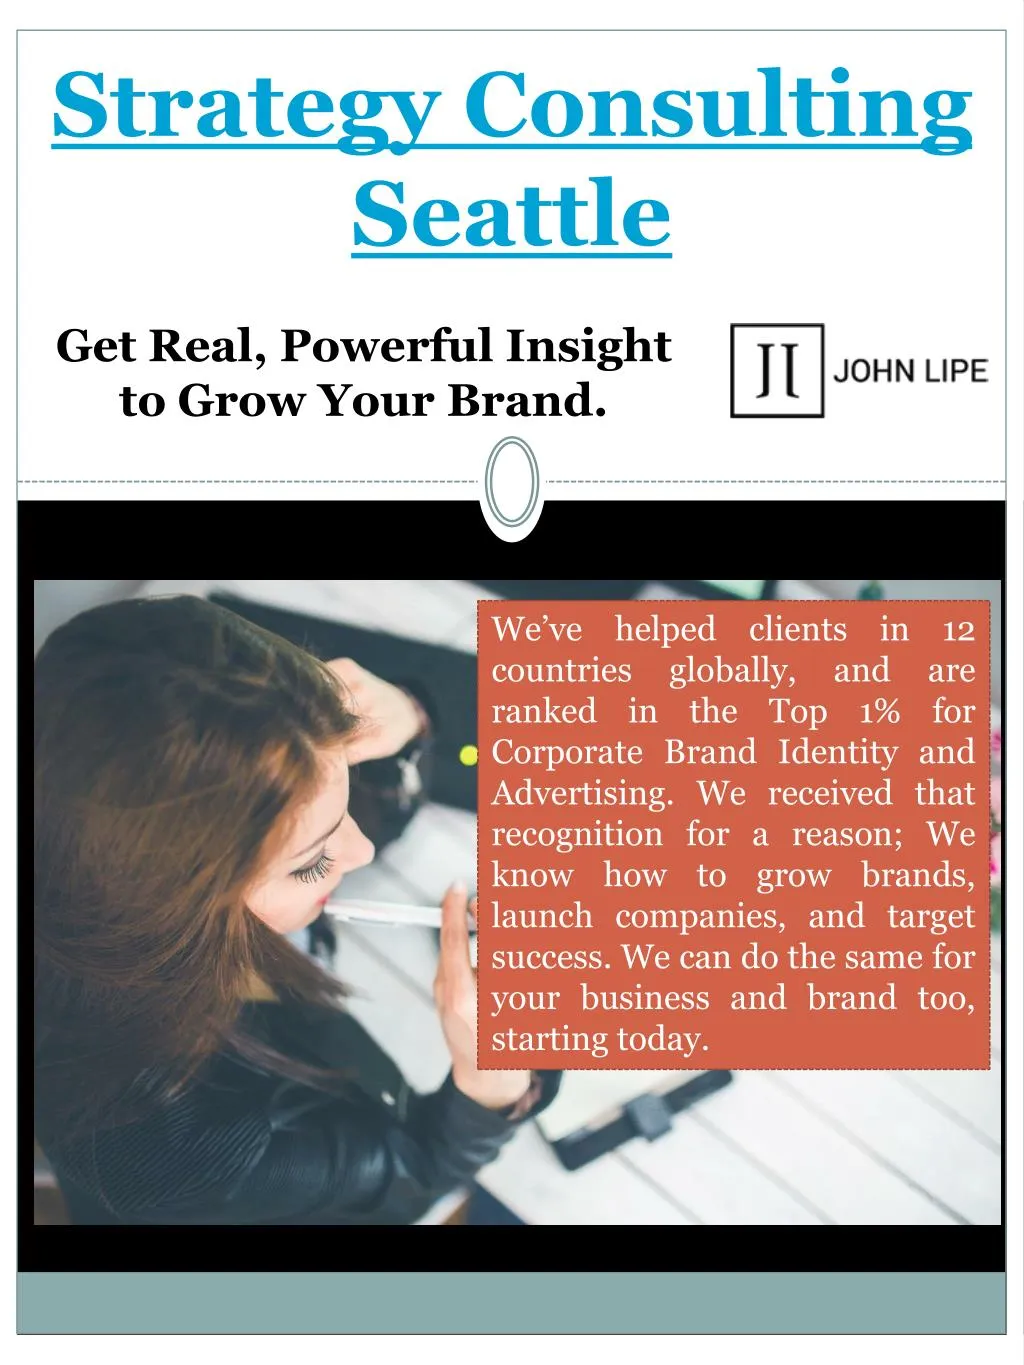 strategy consulting seattle